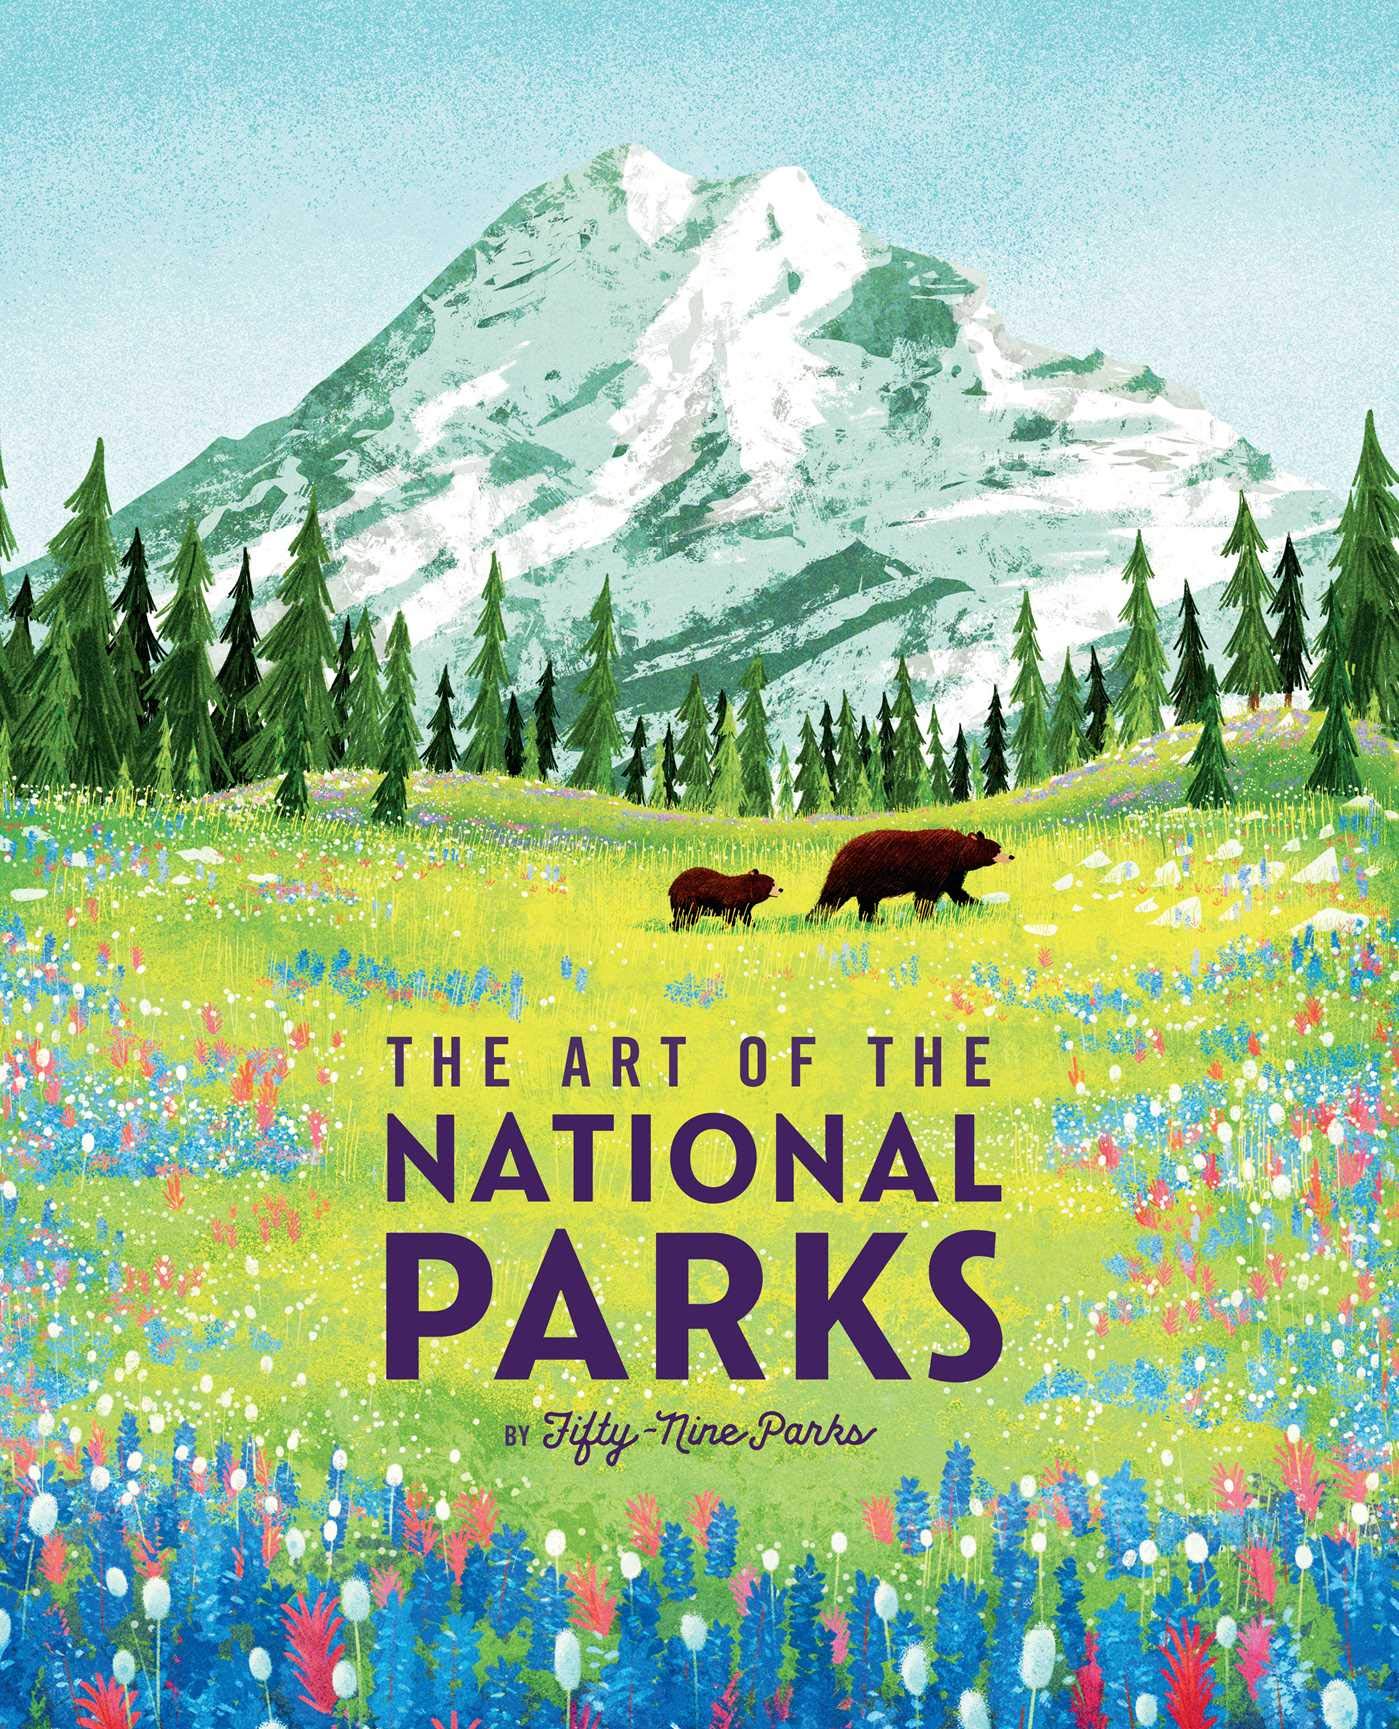 Image for "The Art of the National Parks (Fifty-Nine Parks)"